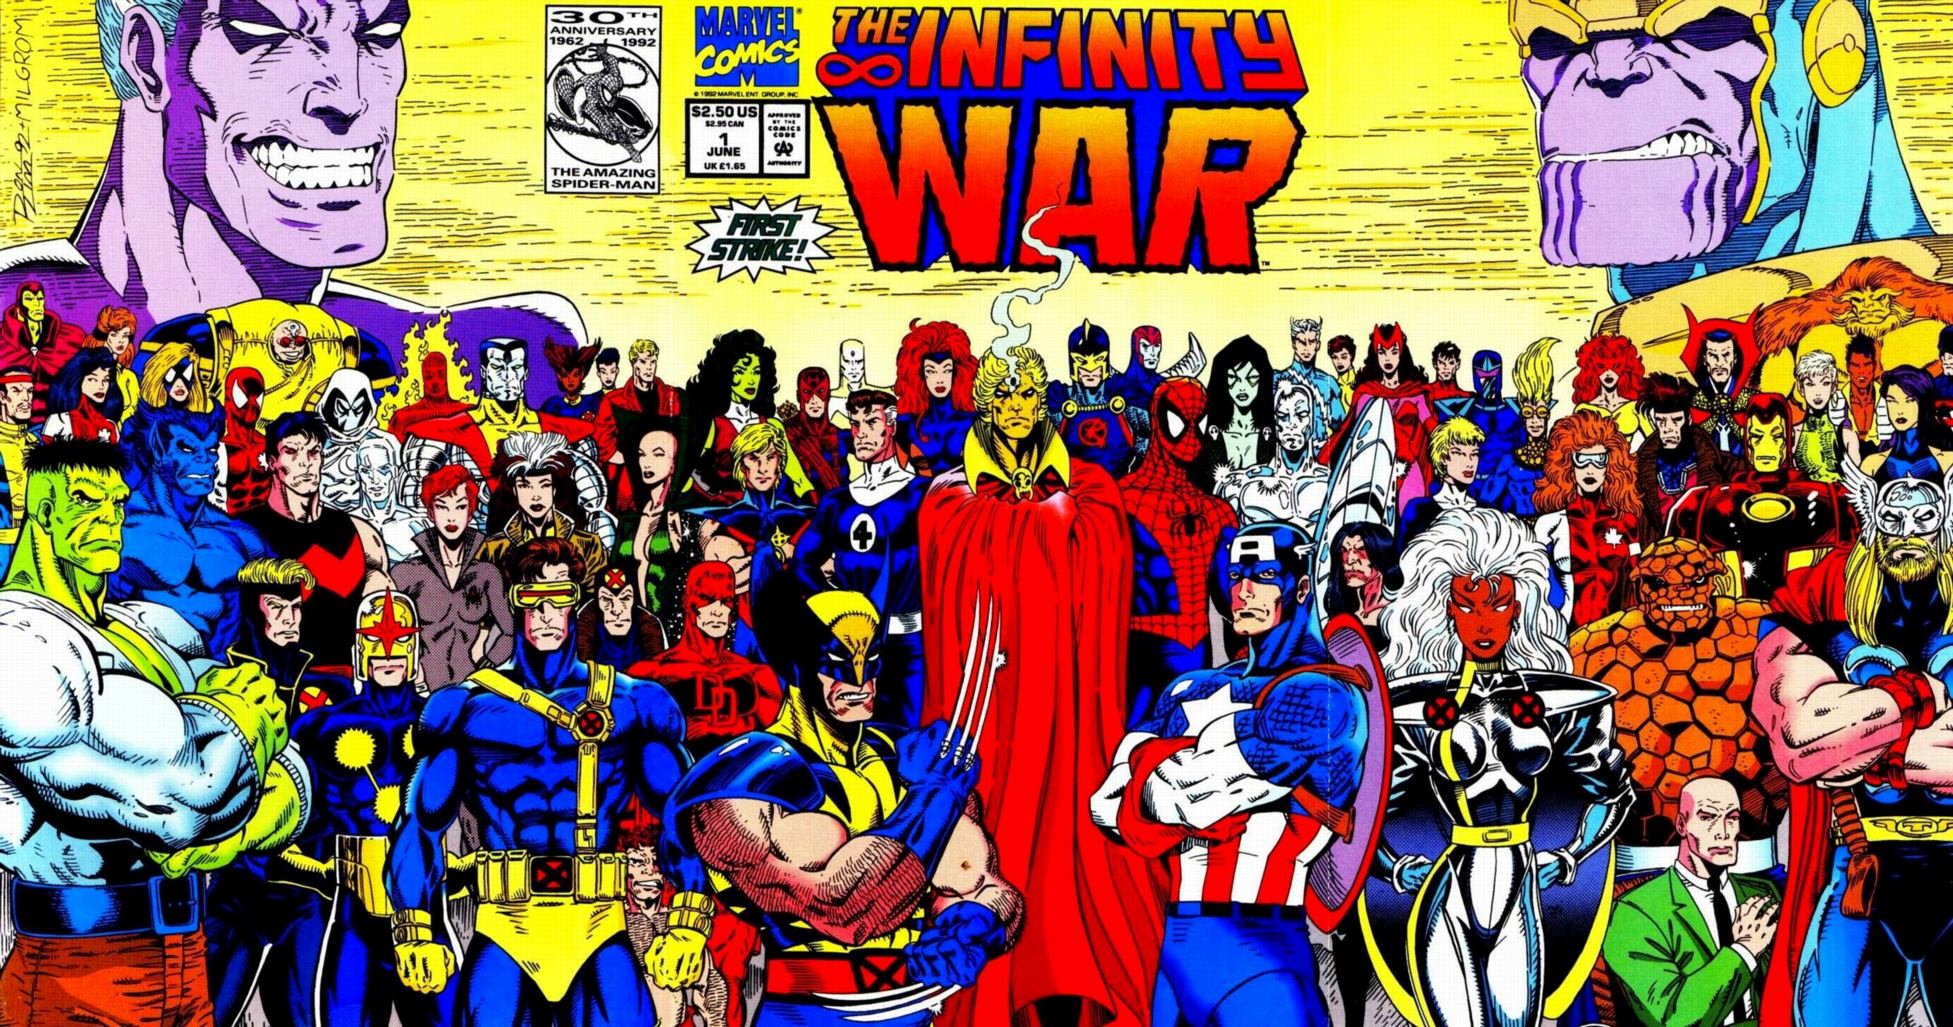 Read online The Infinity War comic -  Issue #1 - 1